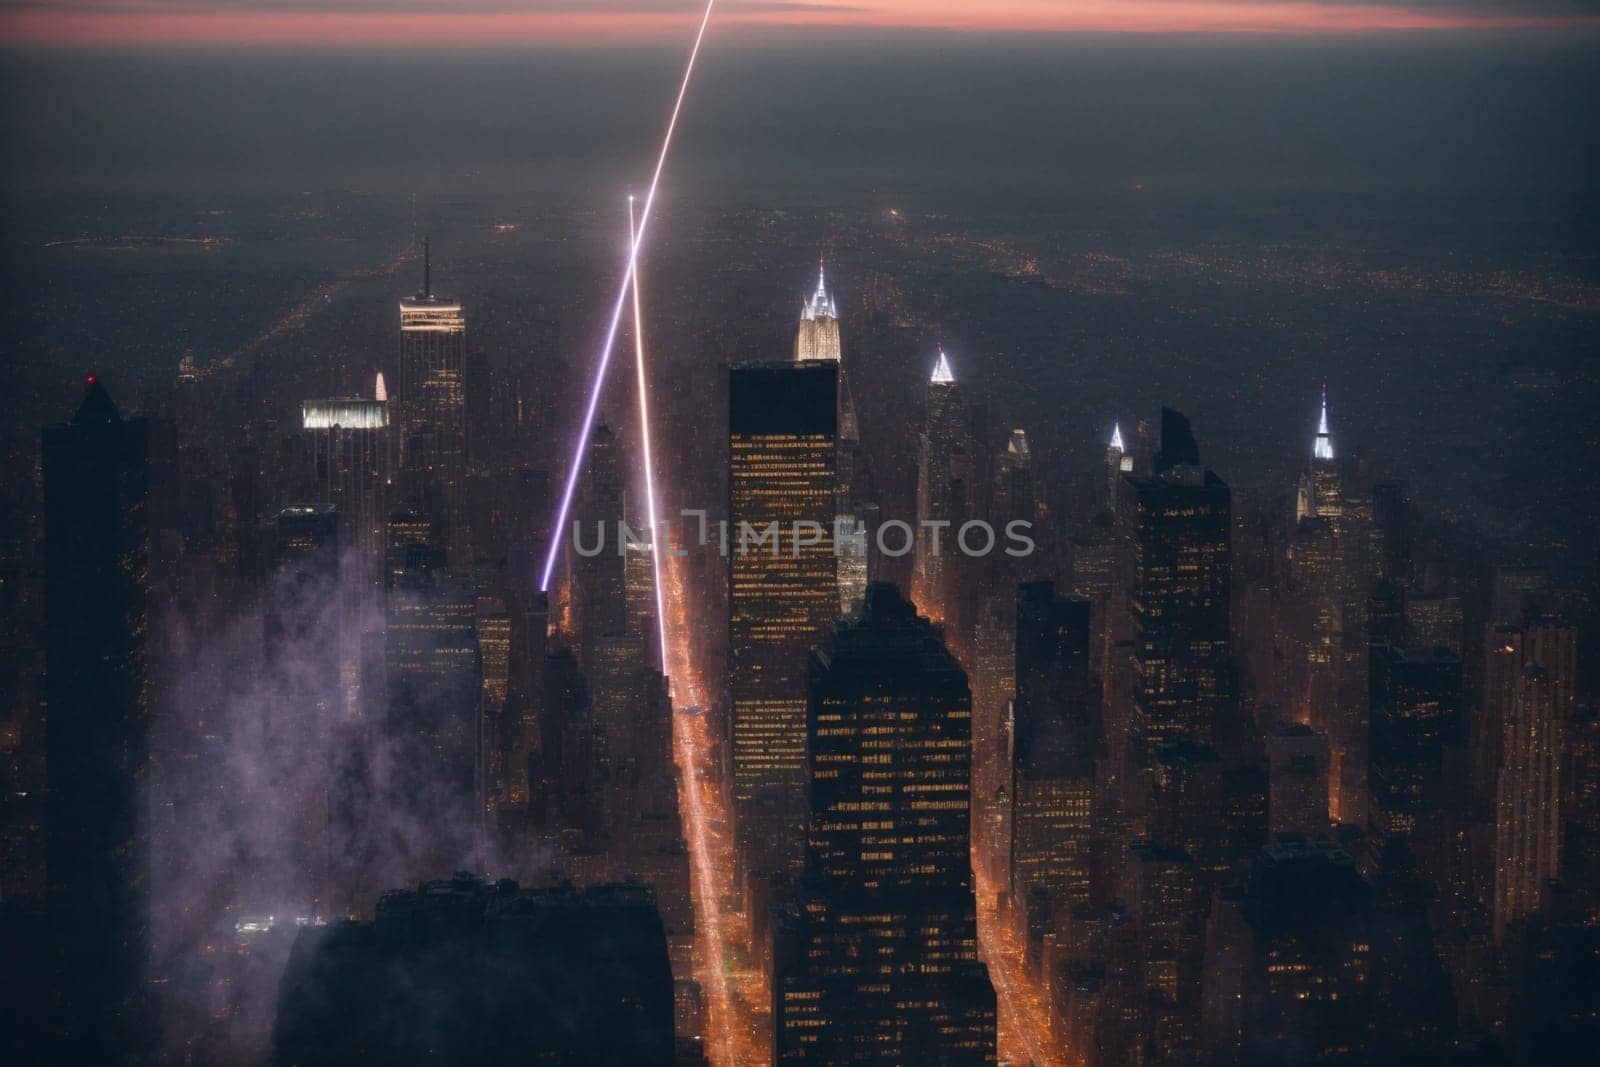 A large jet gracefully flies above a sprawling city illuminated by the glow of artificial lights.